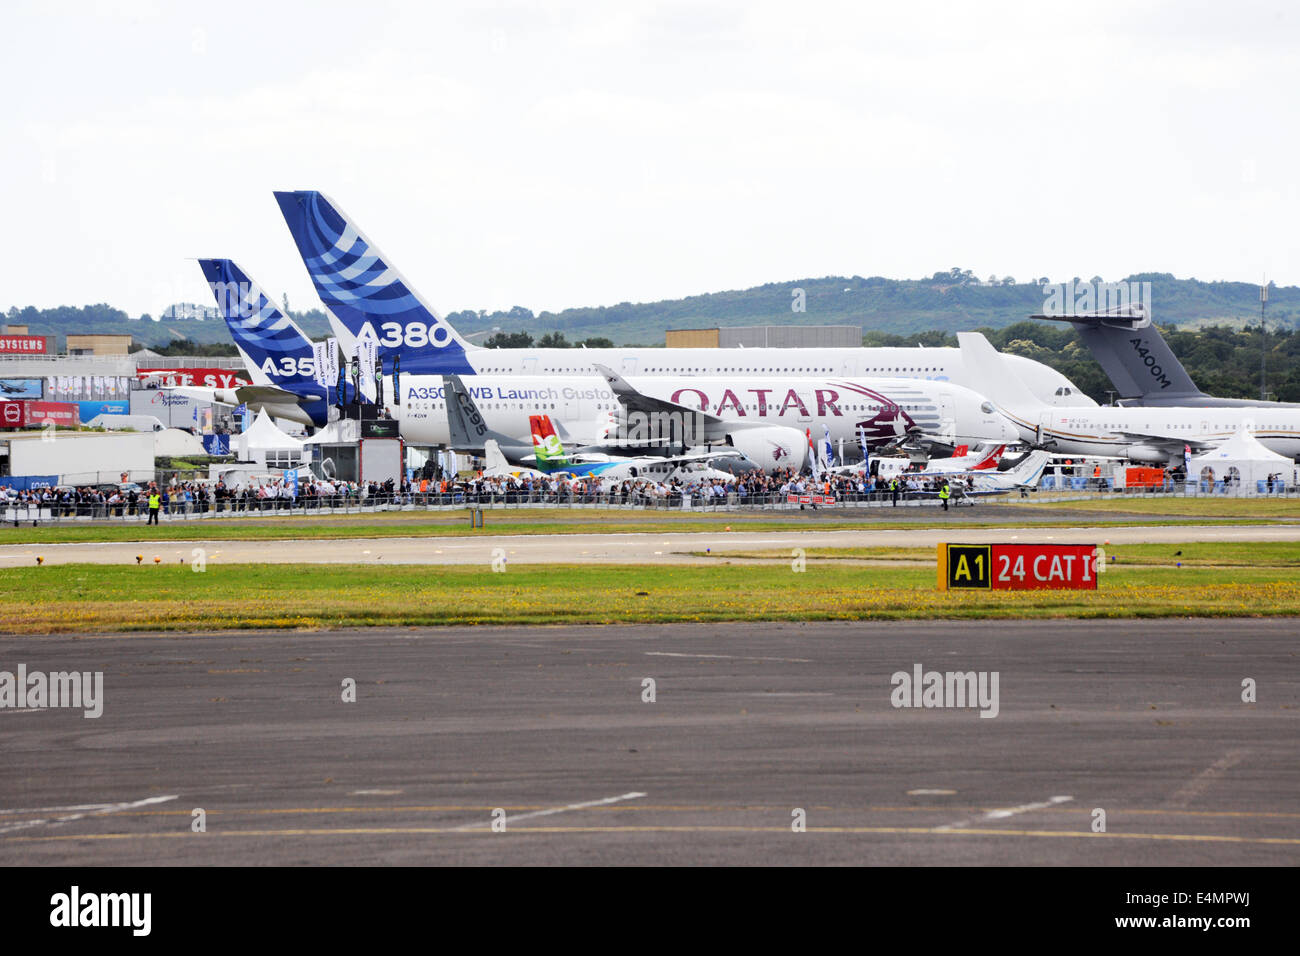 Farnborough, UK. 14th July, 2014. The Airbus A350 and A380 viewed from 'air side' at the Farnborough International Airshow 2014,  Farnborough, UK. 14th July, 2014 Credit:  Martin Brayley/Alamy Live News Stock Photo